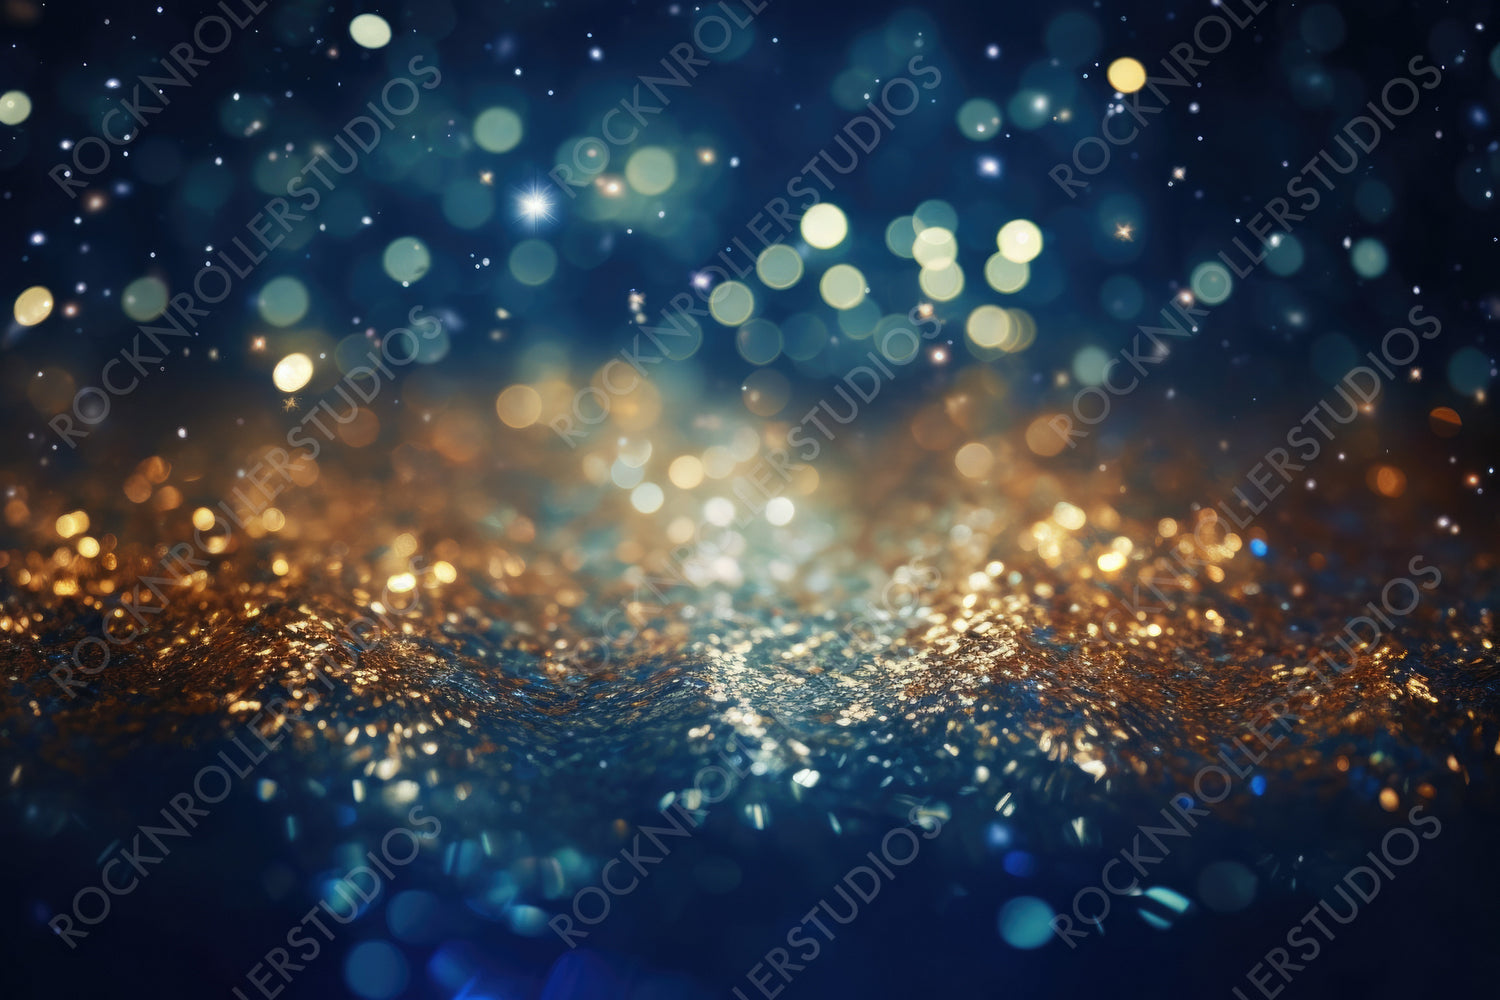 Light baby blue, glitter, sparkle and shine abstract background